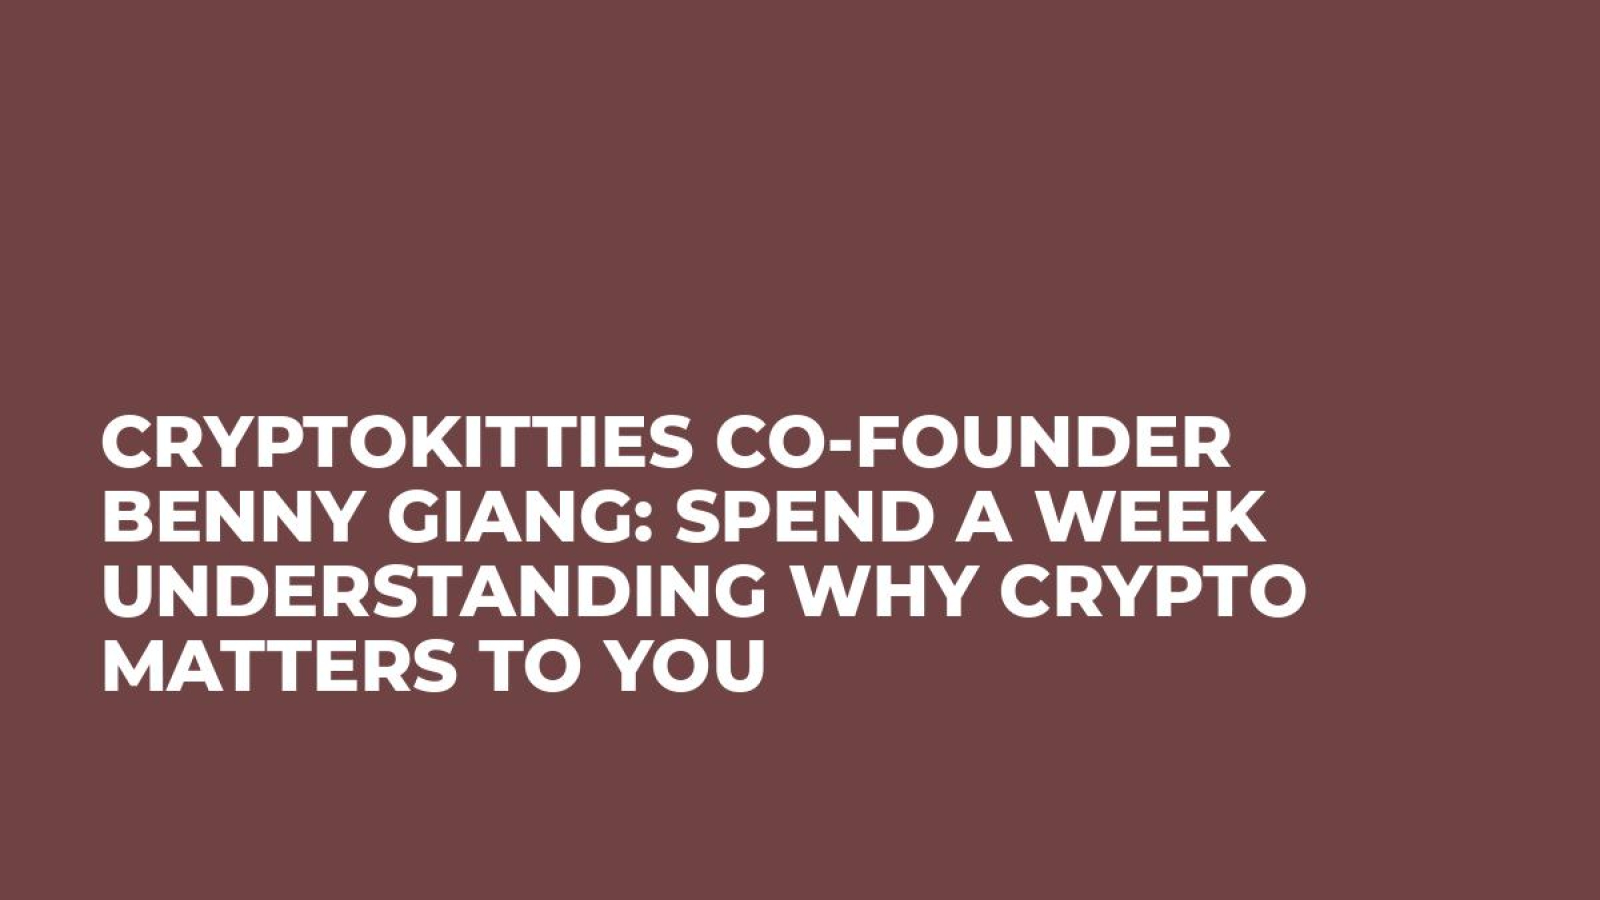 CryptoKitties Co-Founder Benny Giang: Spend a Week Understanding Why Crypto Matters to You